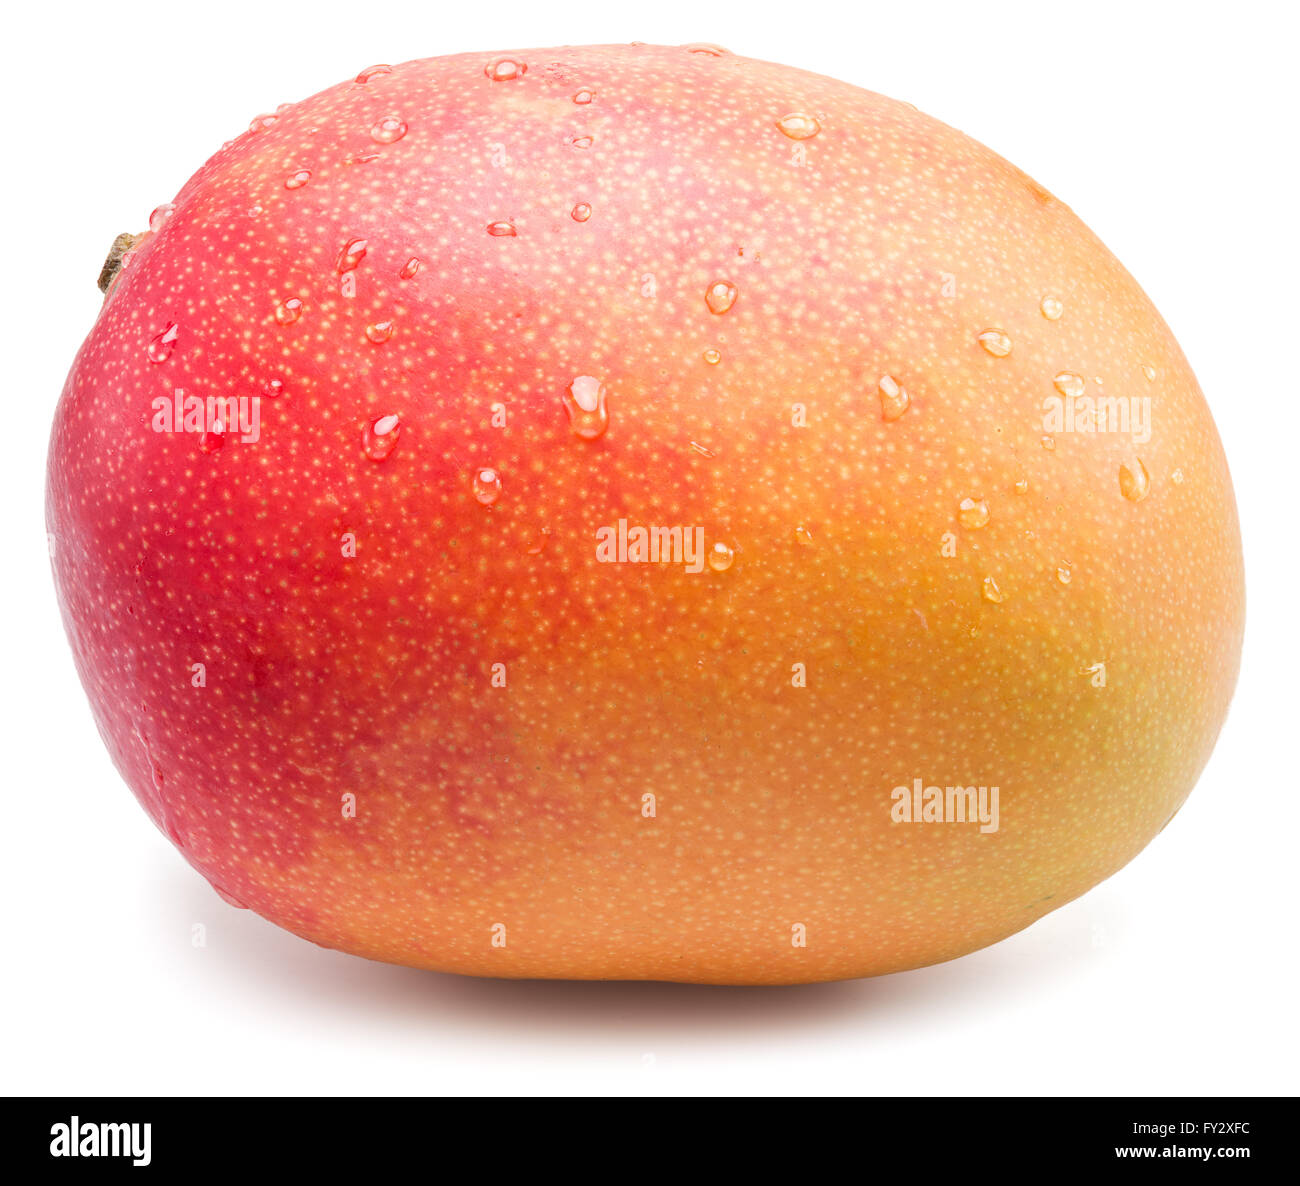 Mango fruit with water drops. Isolated on a white background. Stock Photo